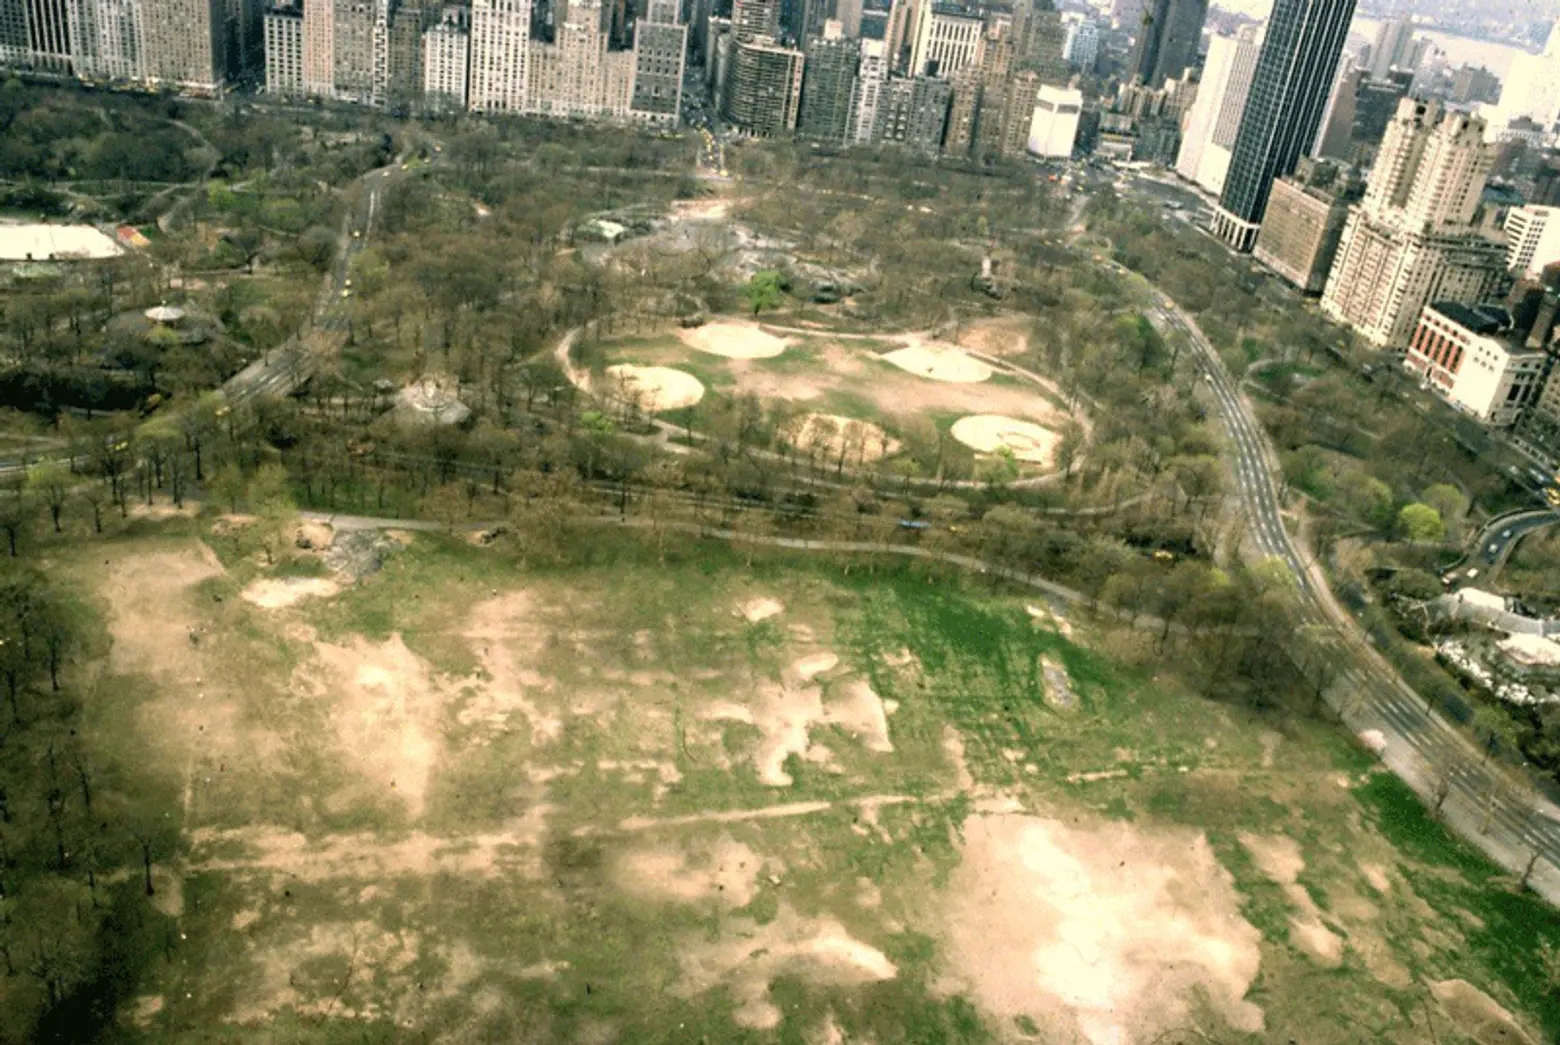 See How Much Central Park Has Changed Since the ’80s in These Before-and-After Photos